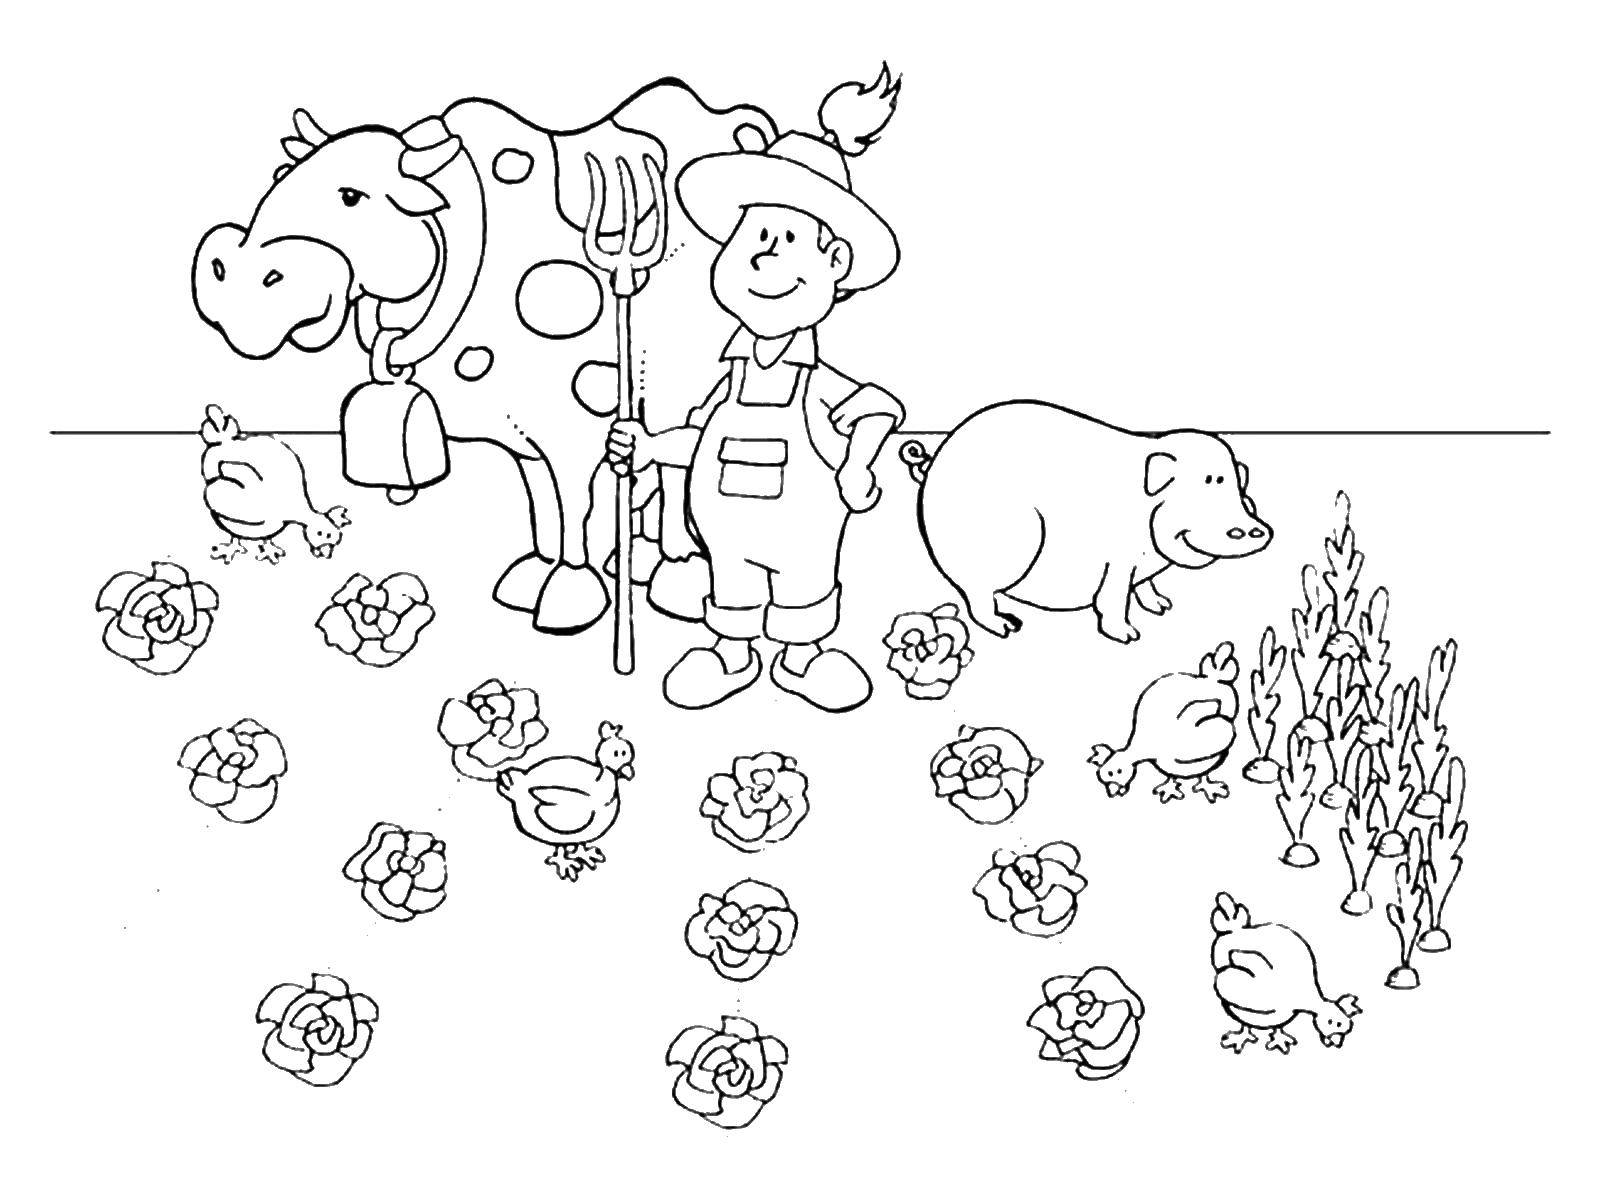 Coloring Farmer with animals. Category a profession. Tags:  profession, farmer, vegetable garden, animals.